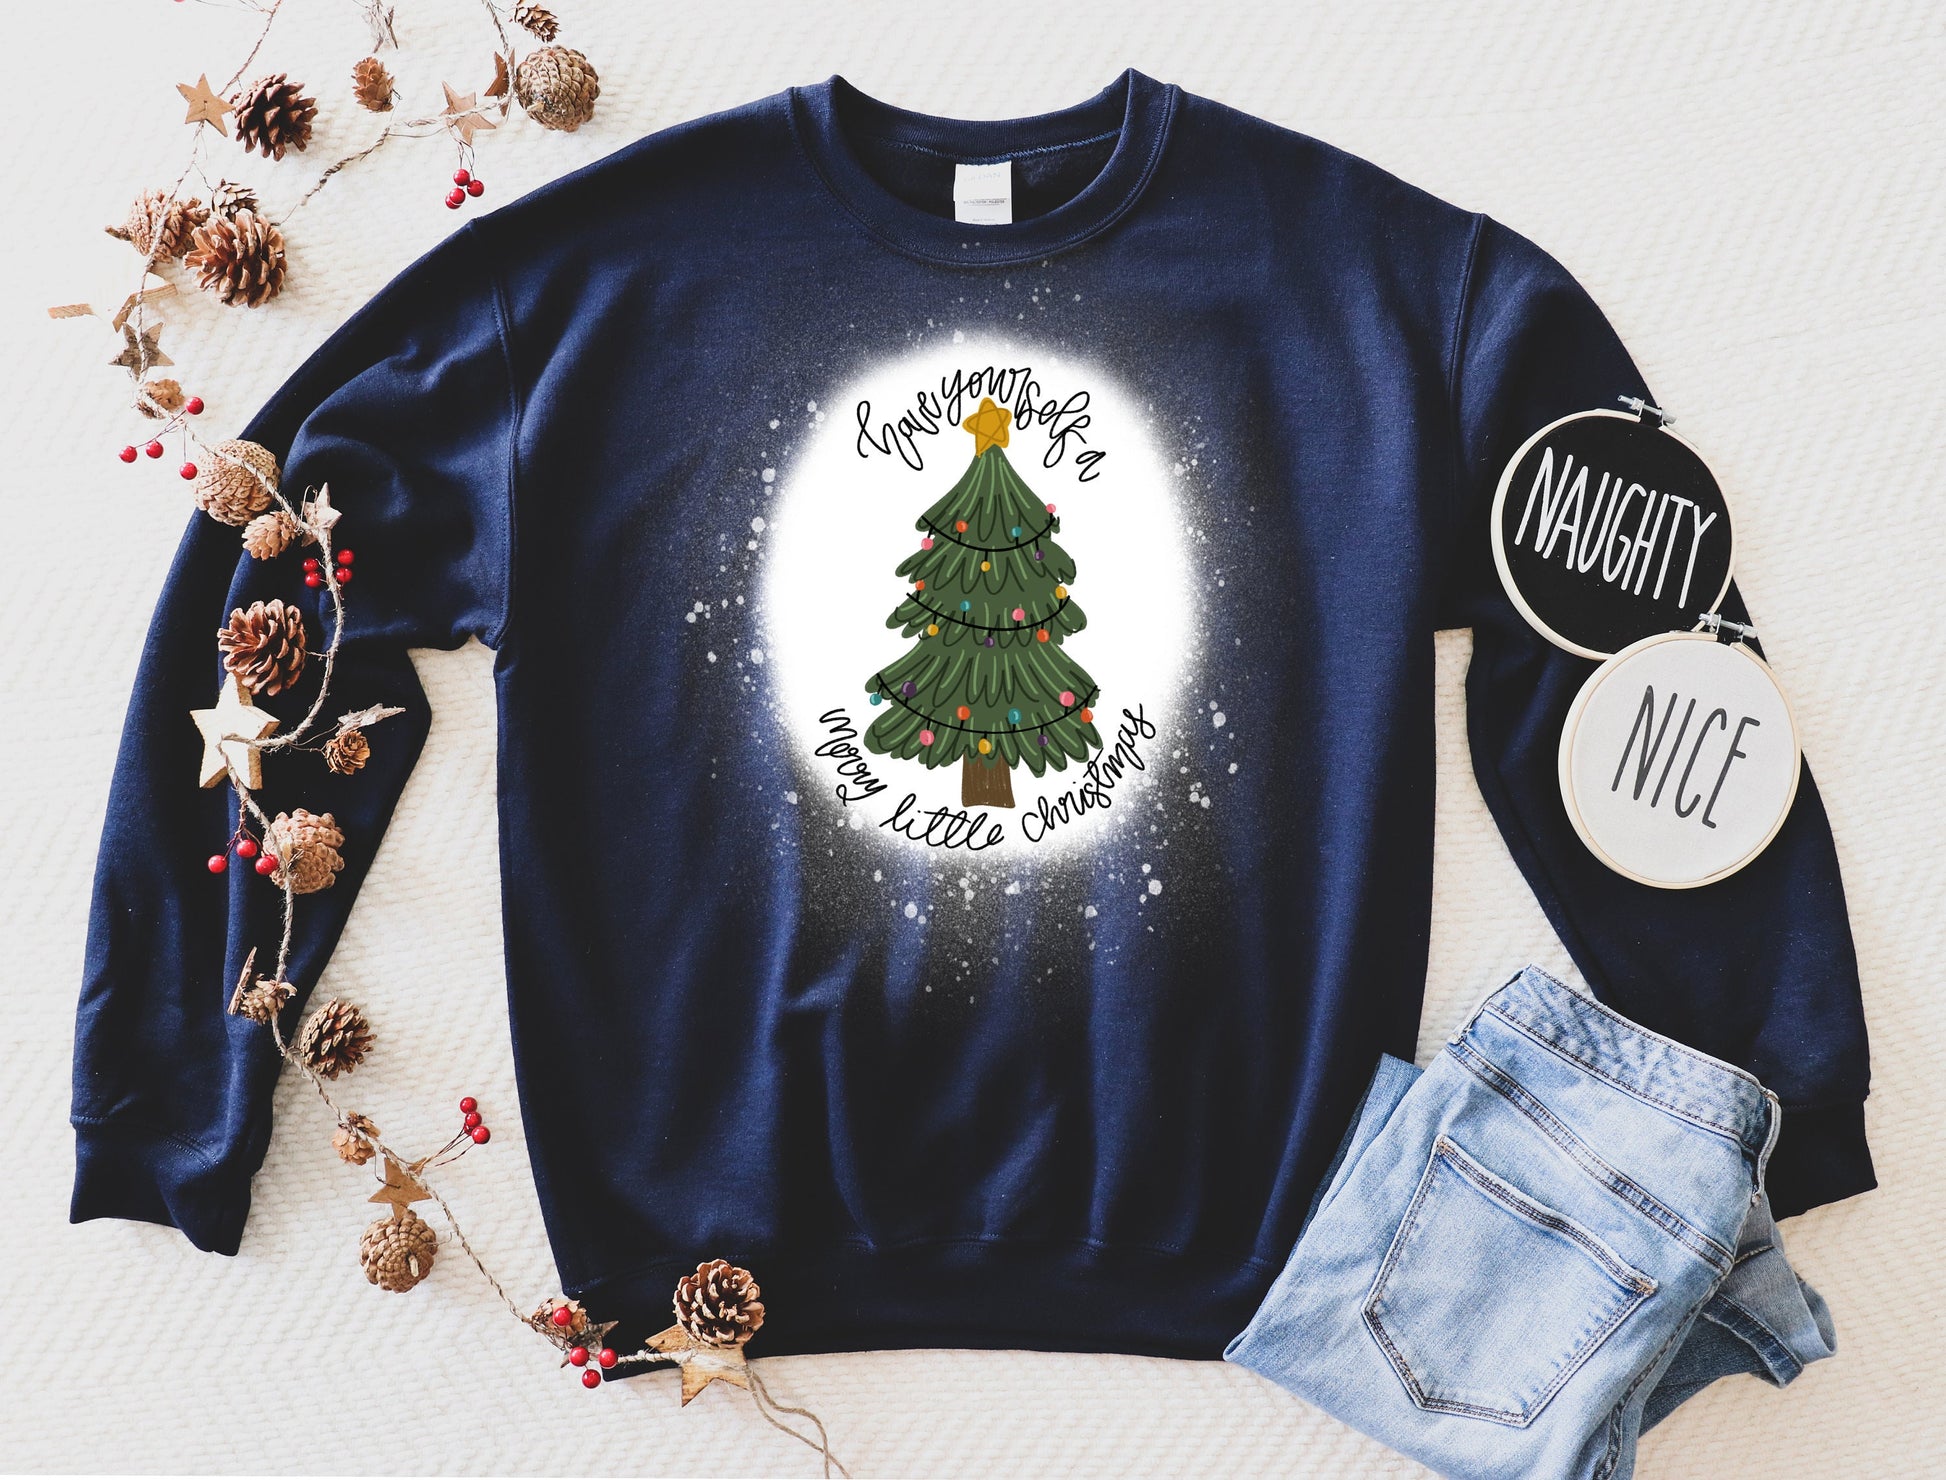 Have Yourself A Merry Little Christmas Sweatshirt Shirt / Chirstmas Tree Tee / Christmas Shirt / Classic Christmas Graphic Shirt / Xmas Tree - Farmhouse Vinyl Co